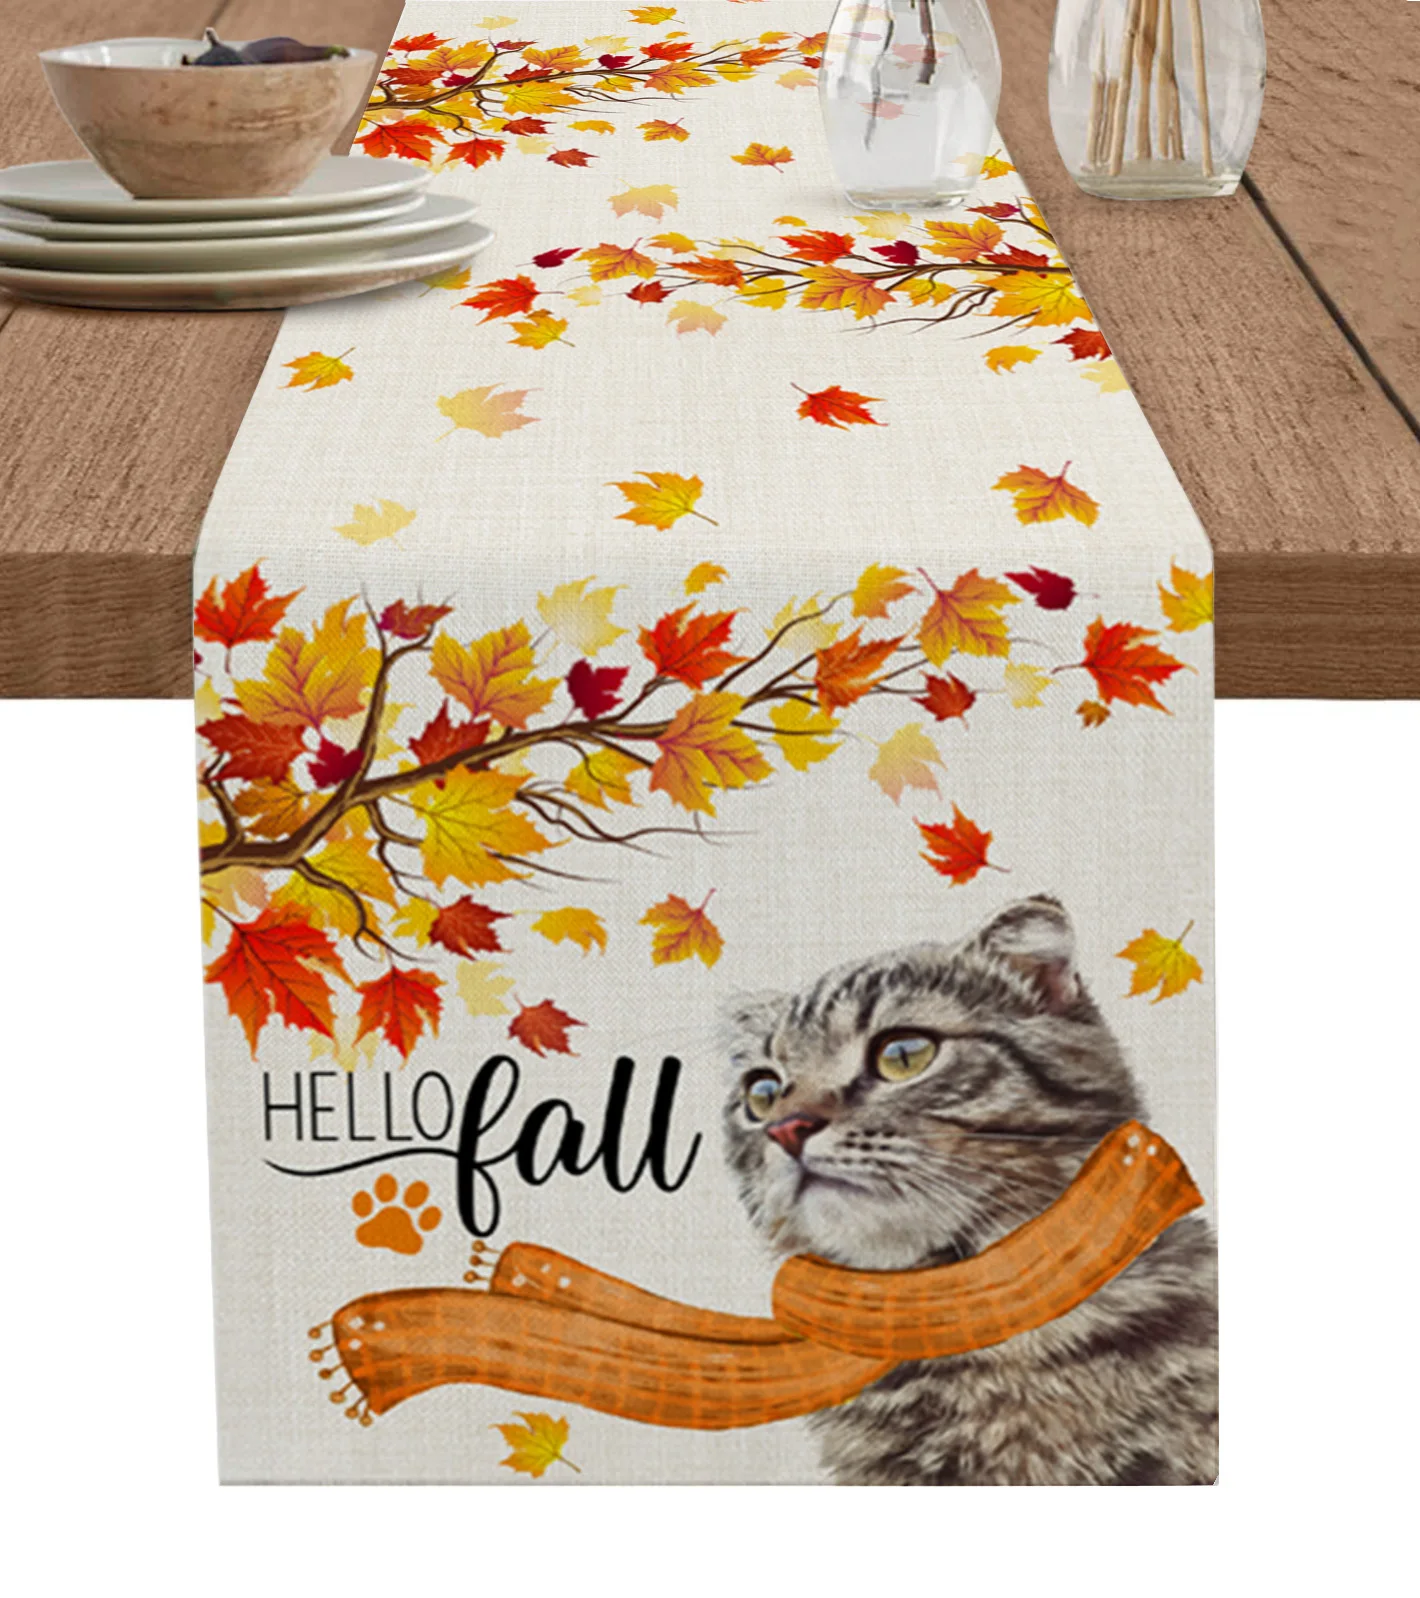 

Thanksgiving Animal Cat Scarf Maple Leaf Branch Wedding Table Runners Table Mats Party Table Decor Festival Holidays Tablecloths